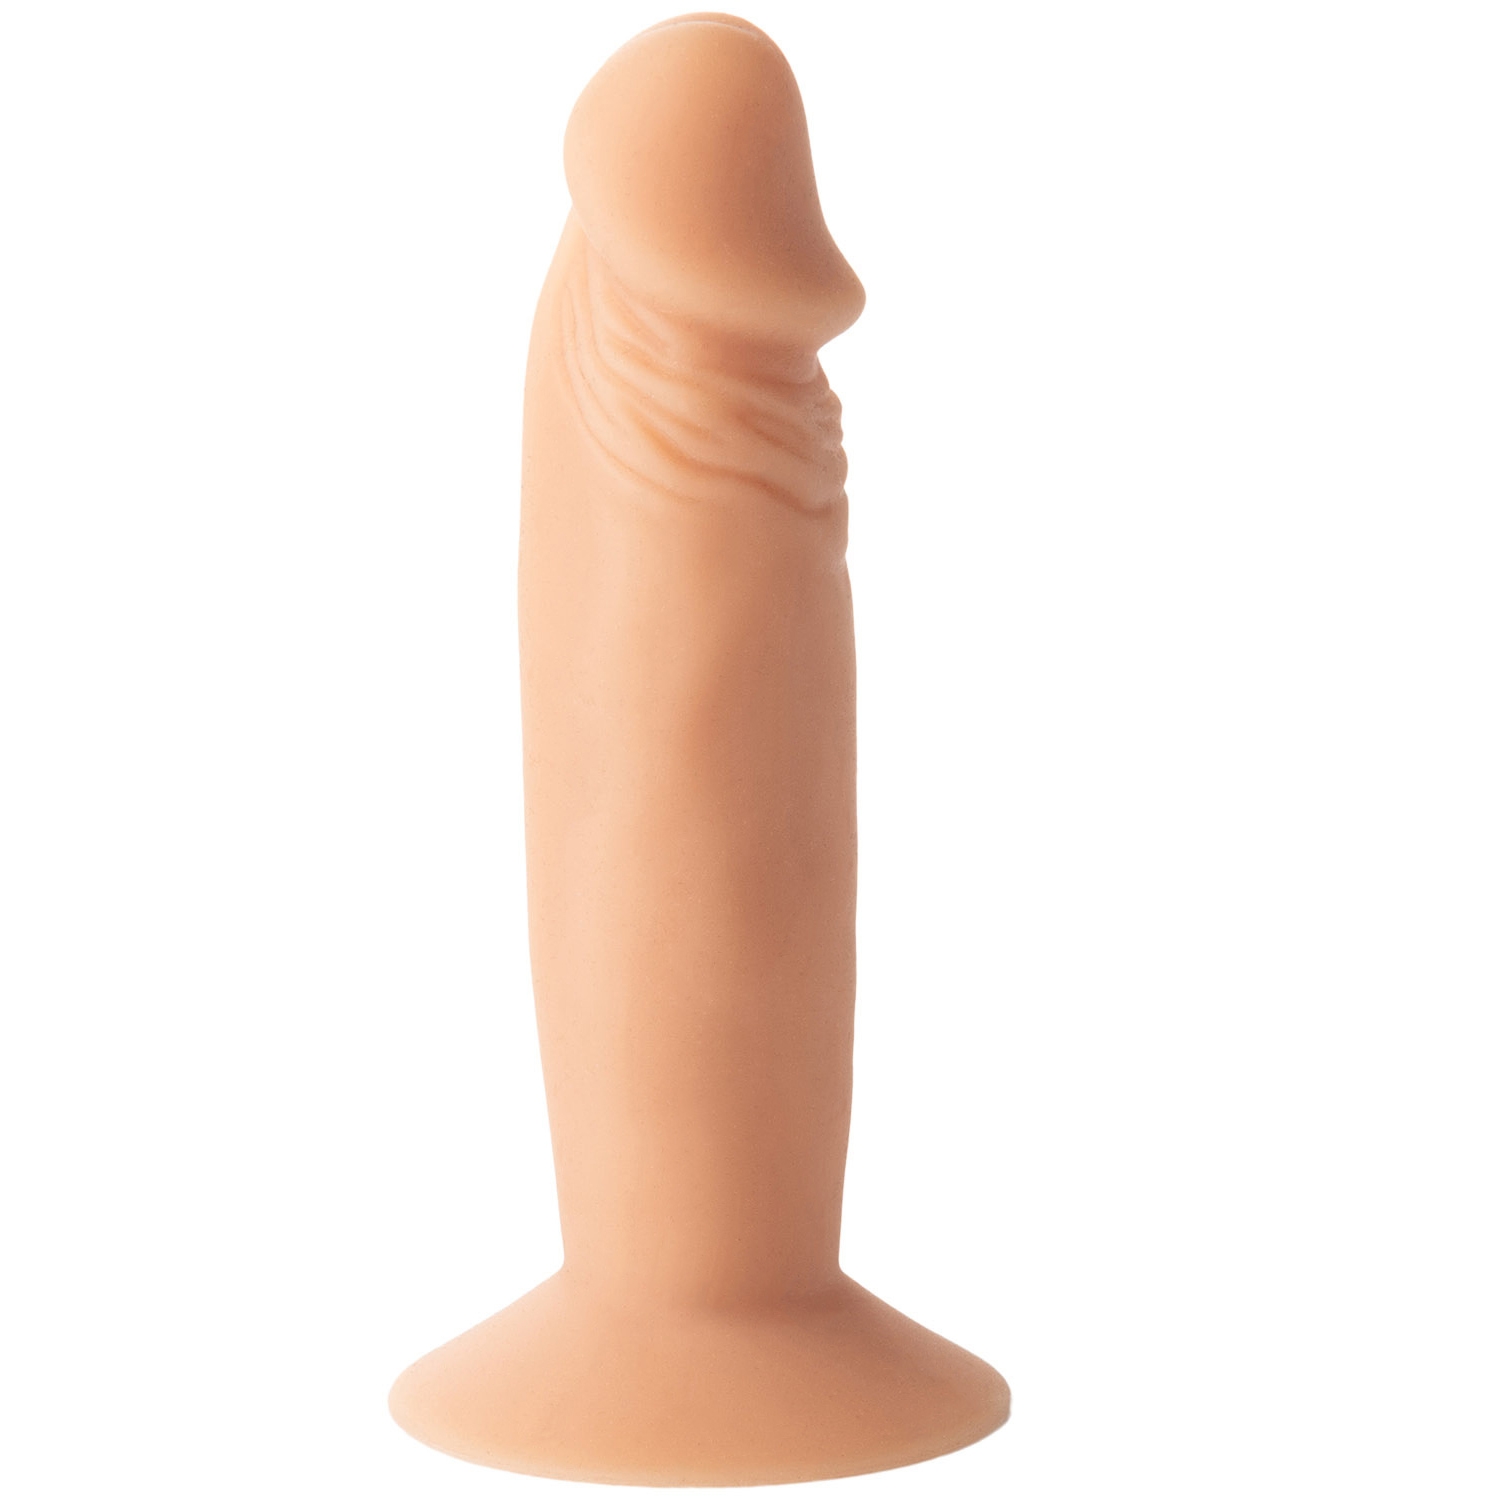 Willie City Luxe Realistisk Silikone Dildo med Sugekop 18 cm - Nude thumbnail